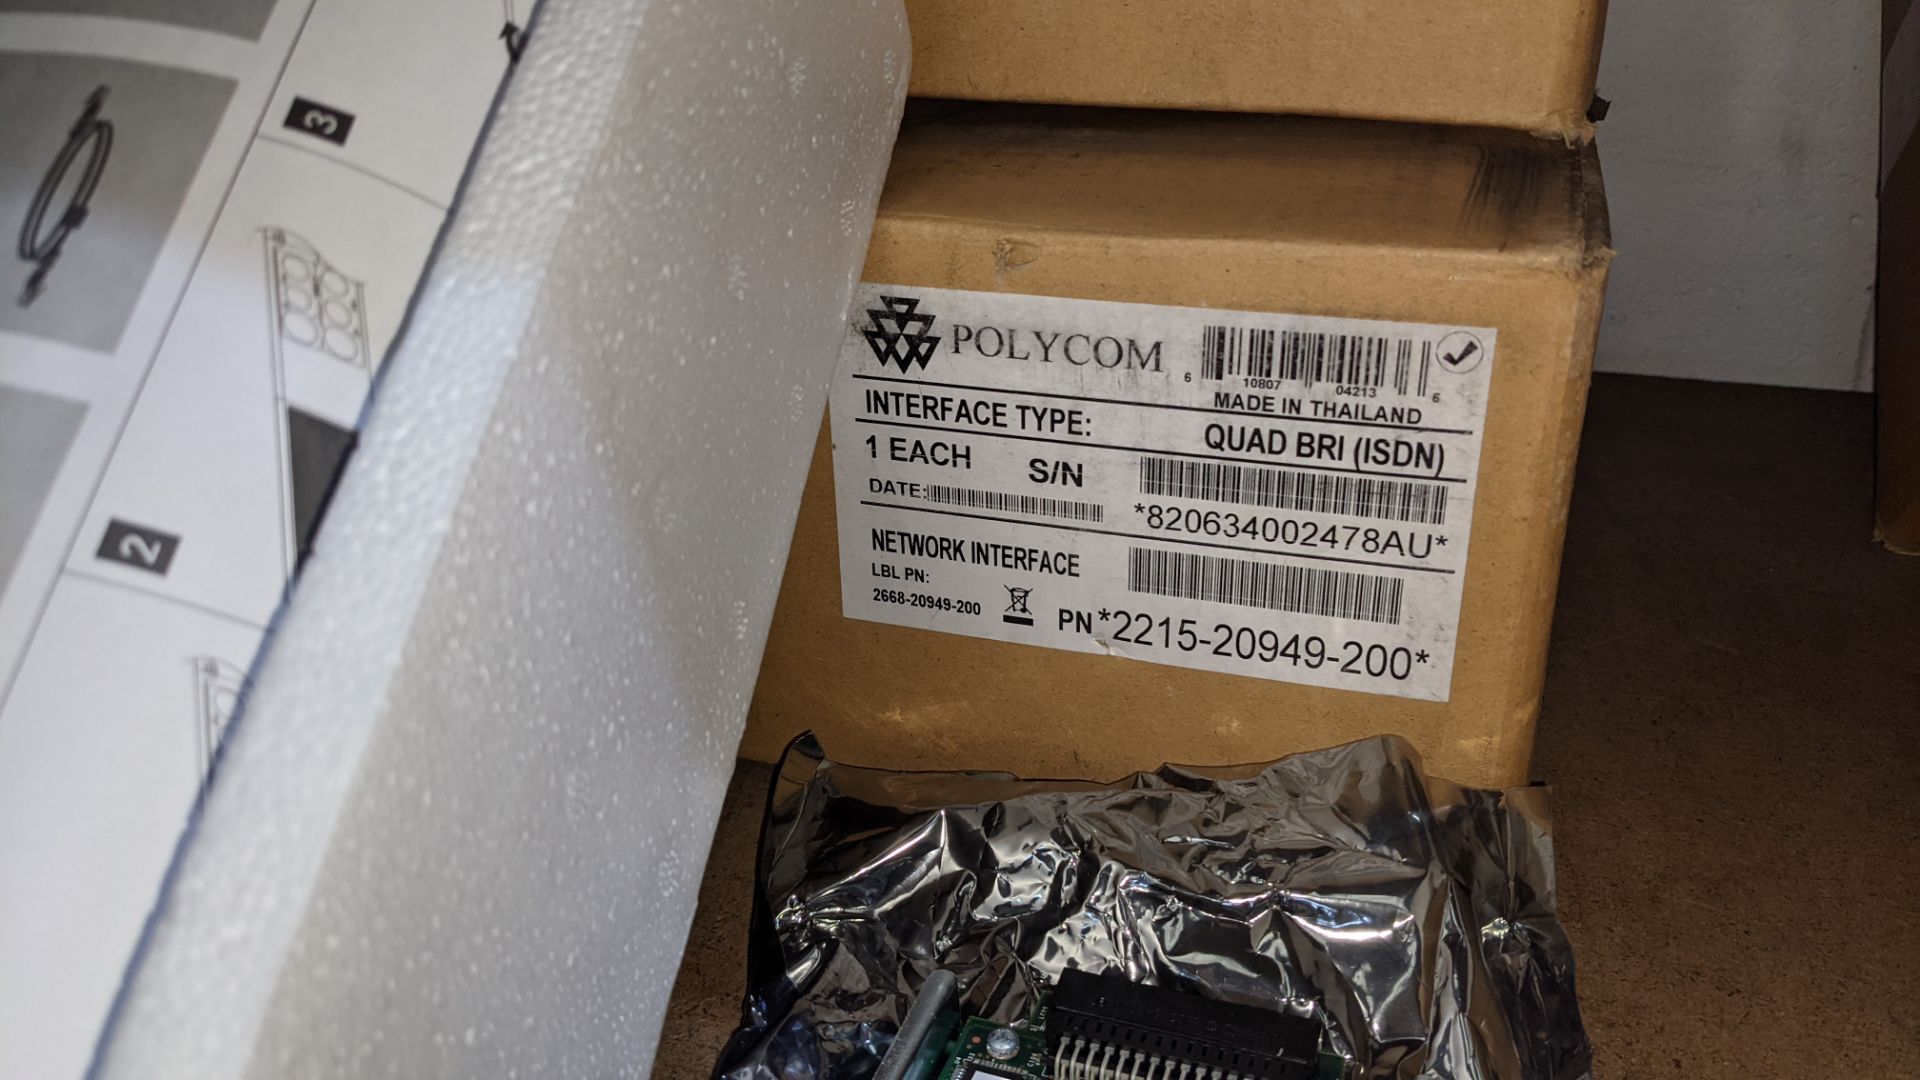 2 off Polycom QUAD BRI (ISDN) network interfaces part number 2201-20948-200 - Image 7 of 8